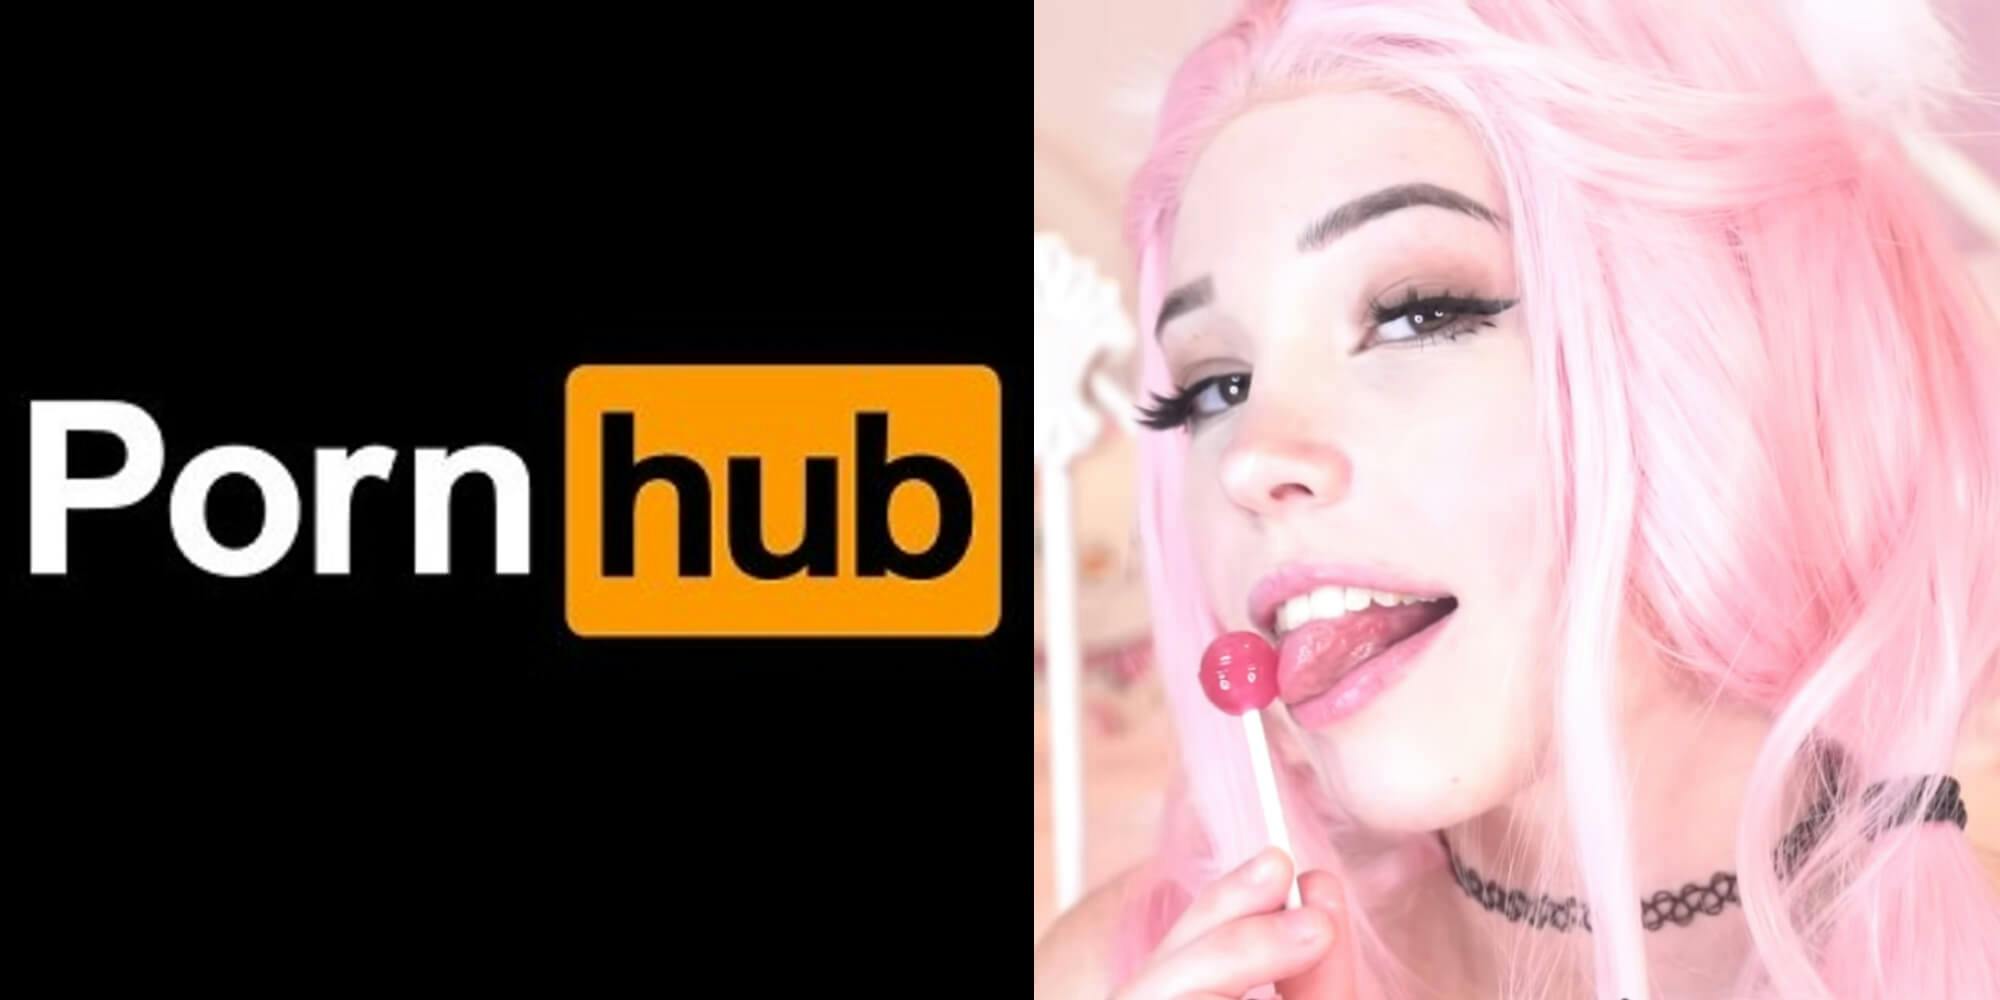 Streamers dominated Pornhub searches in 2019